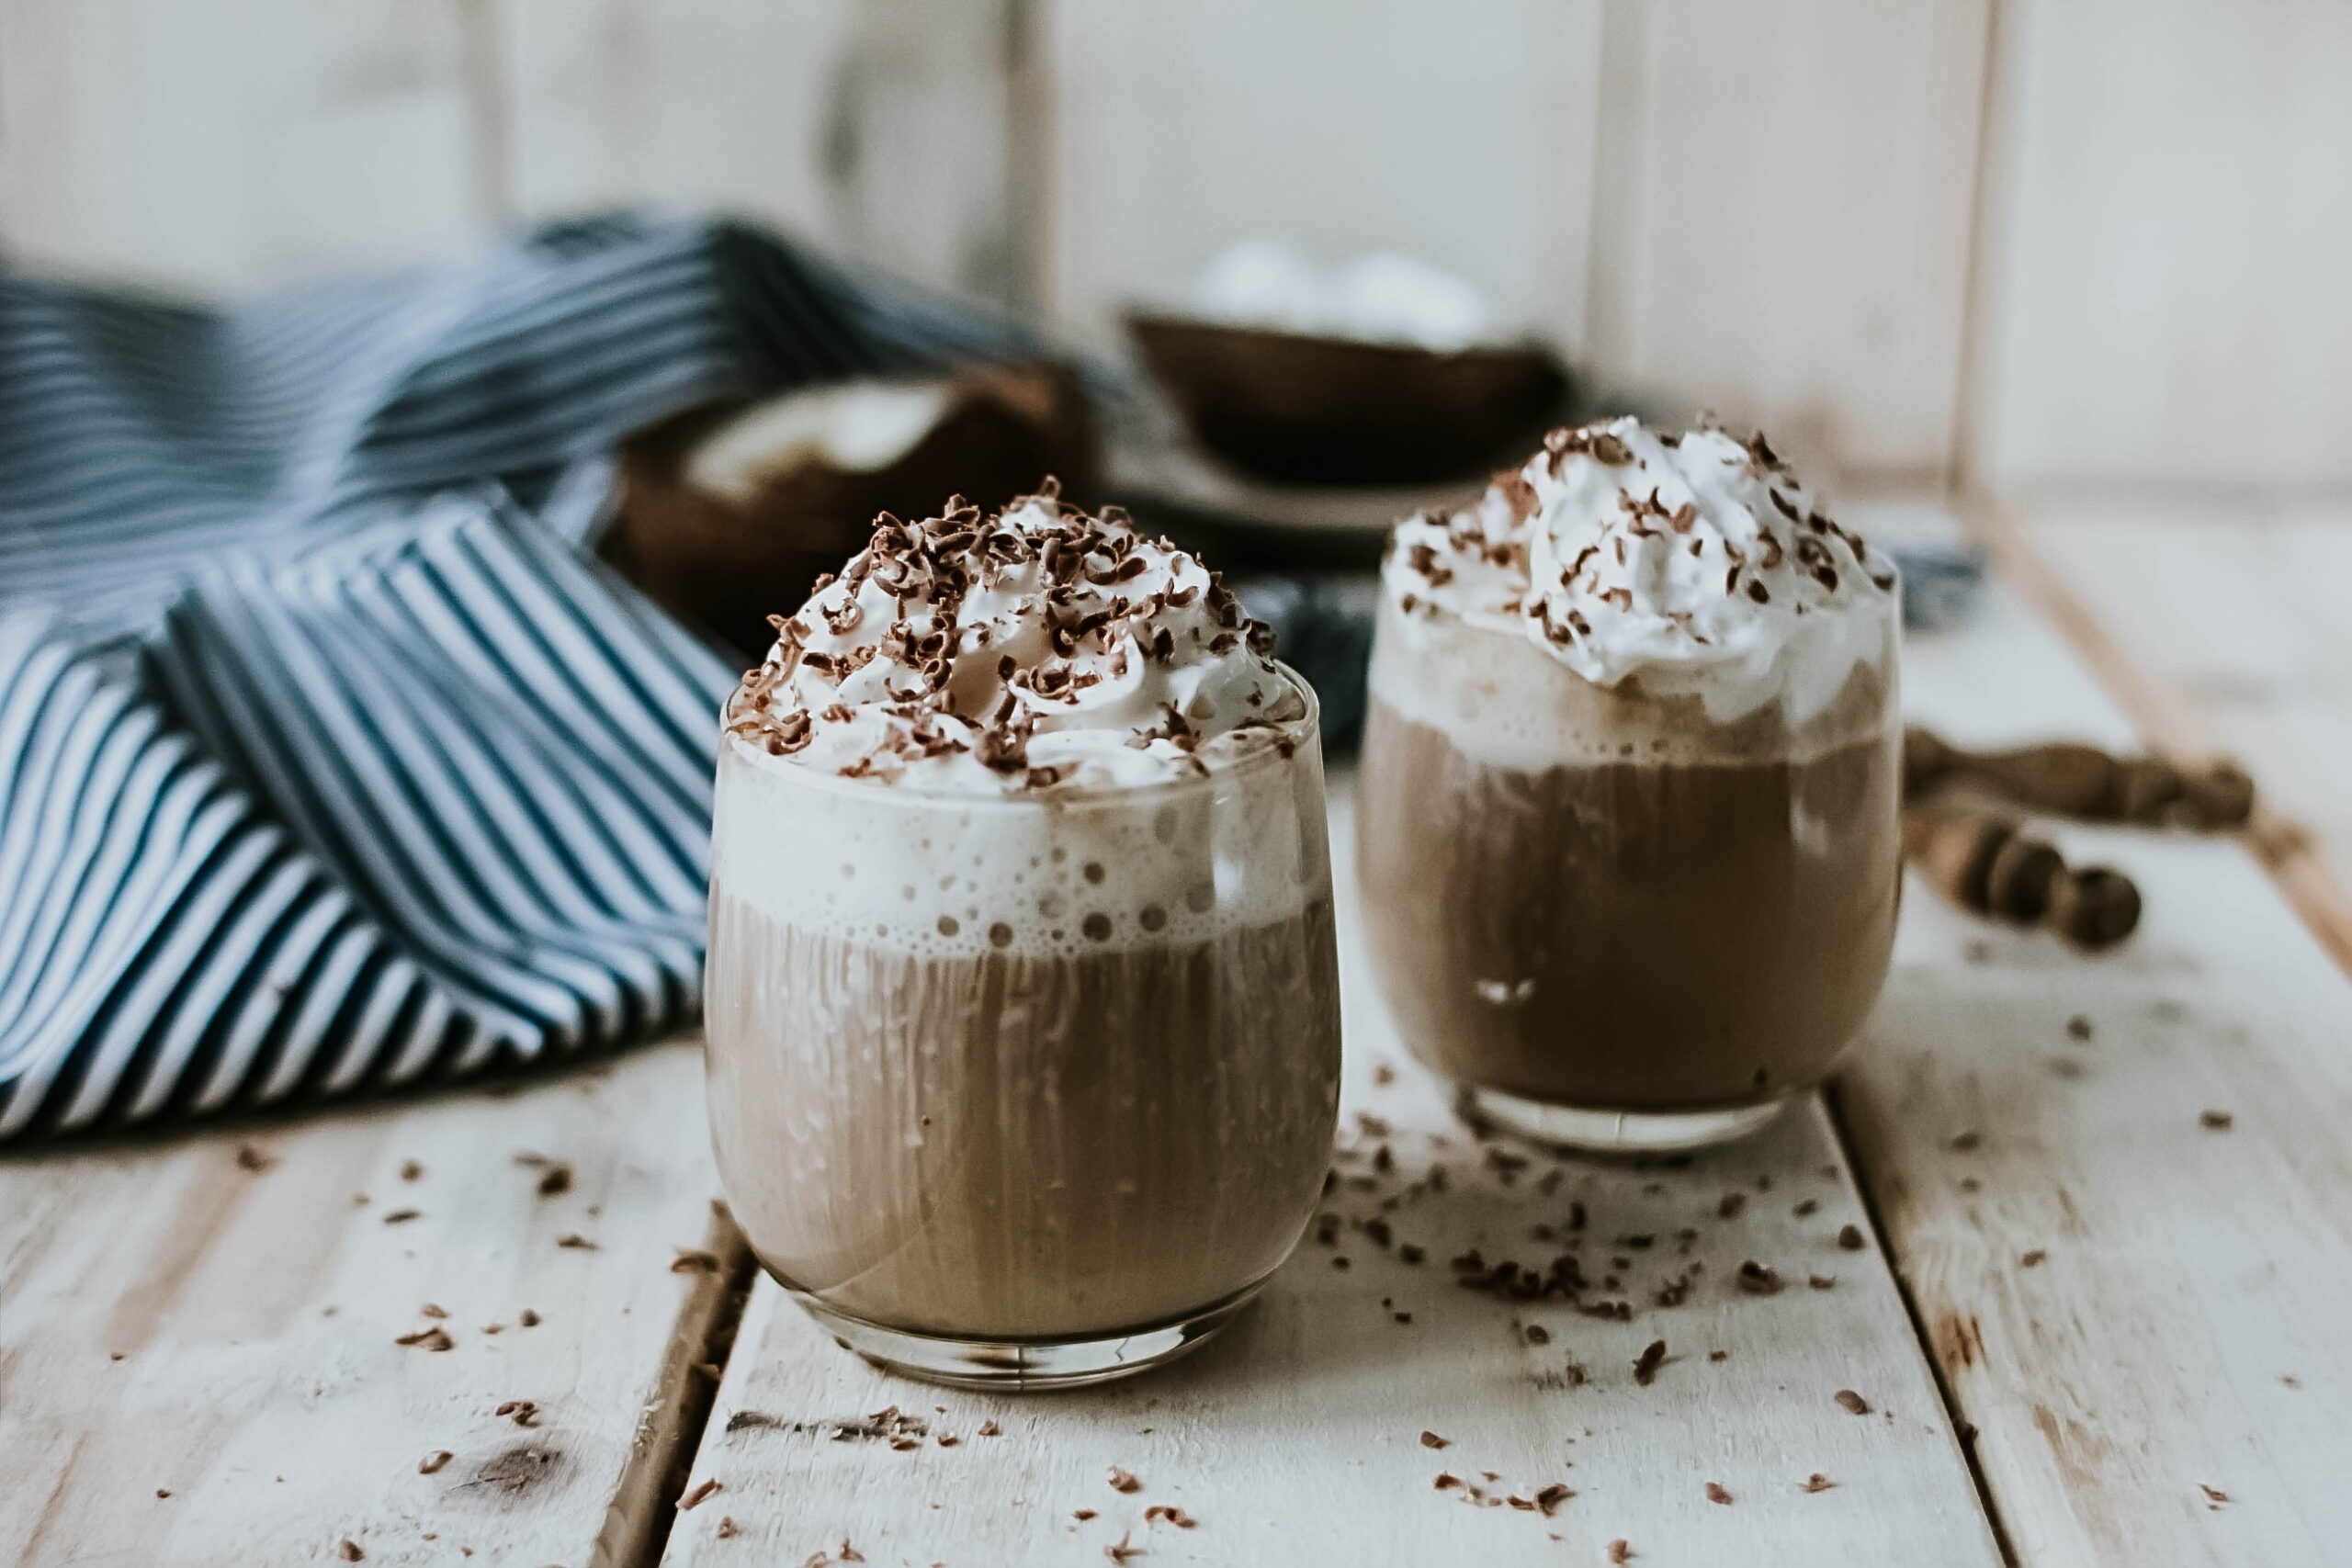 This Chocolate Coconut Milk Latte Recipe is the perfect caffeine fix for chocolate lovers who want a dairy-free and gluten free option! Vegan yet creamy and delicious! Better than Starbucks!